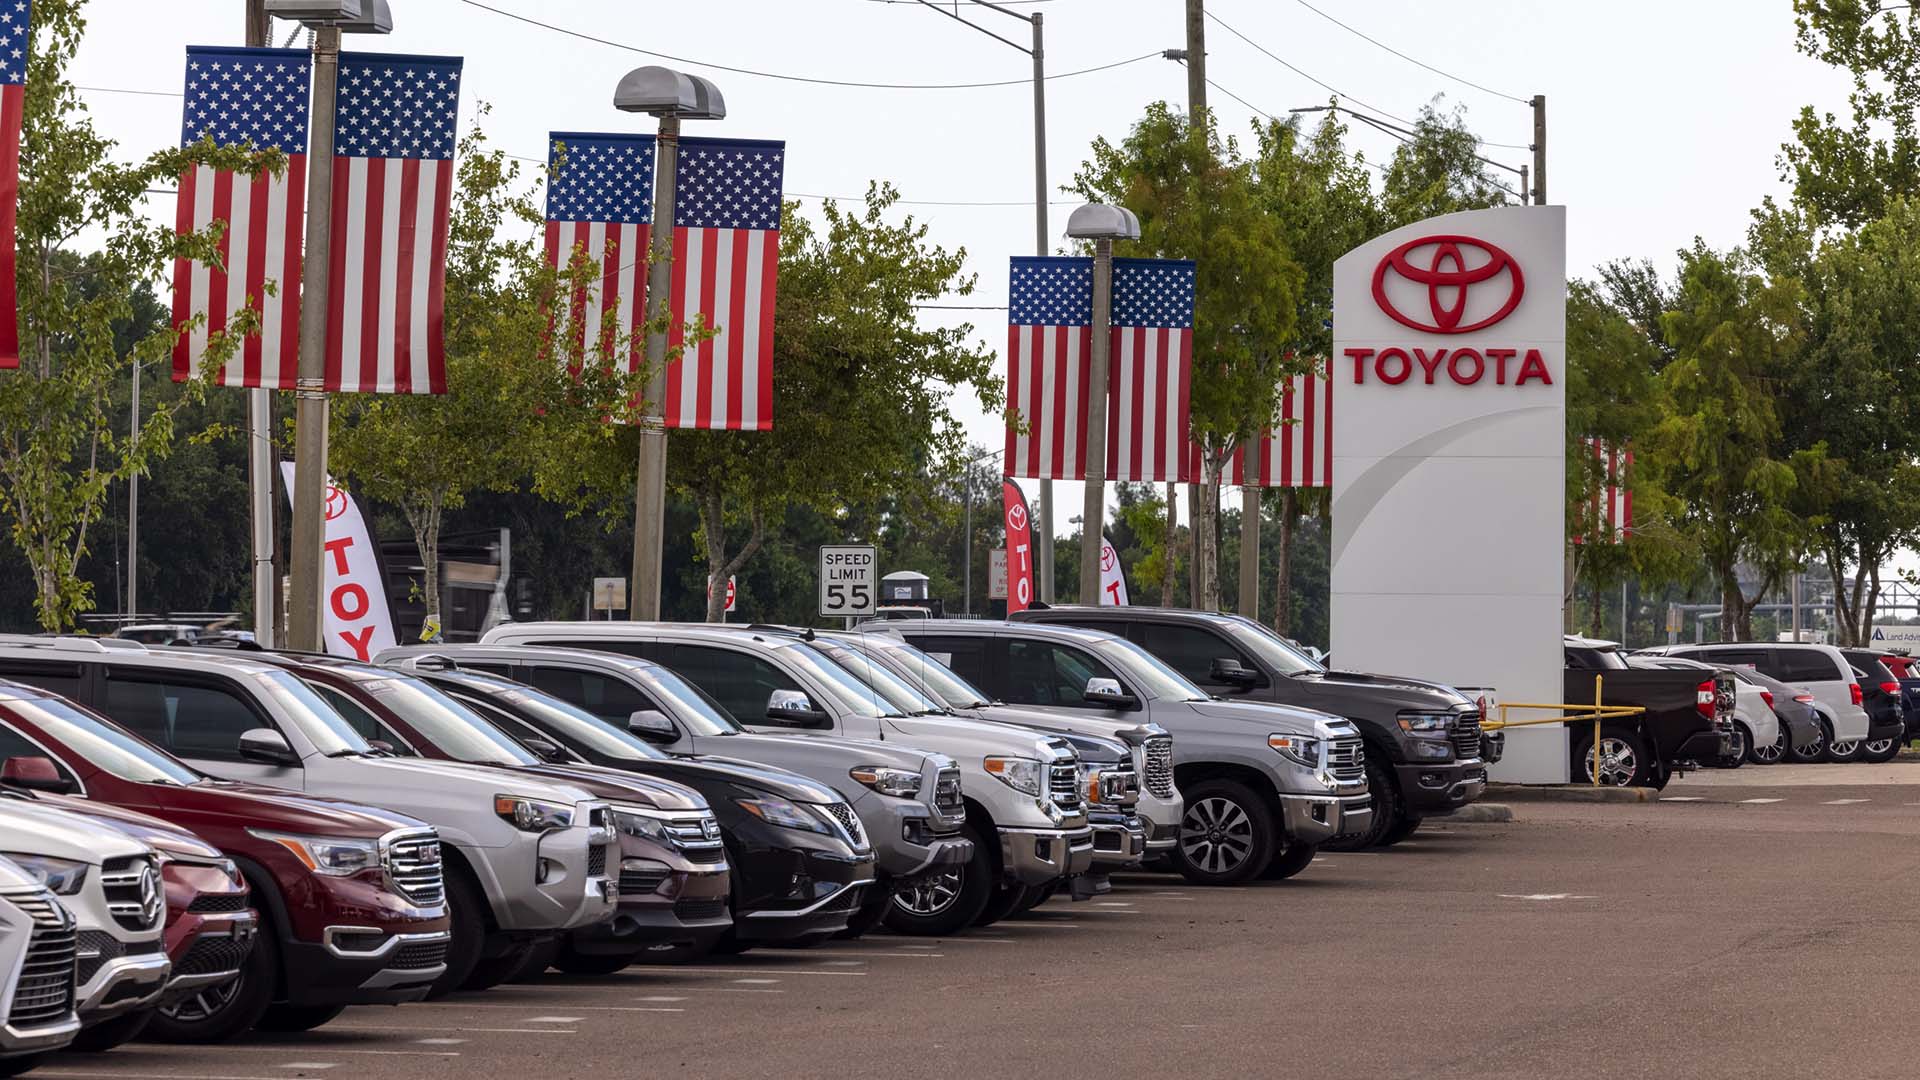 View of the car lot at AutoNation Toyota Pinellas Park